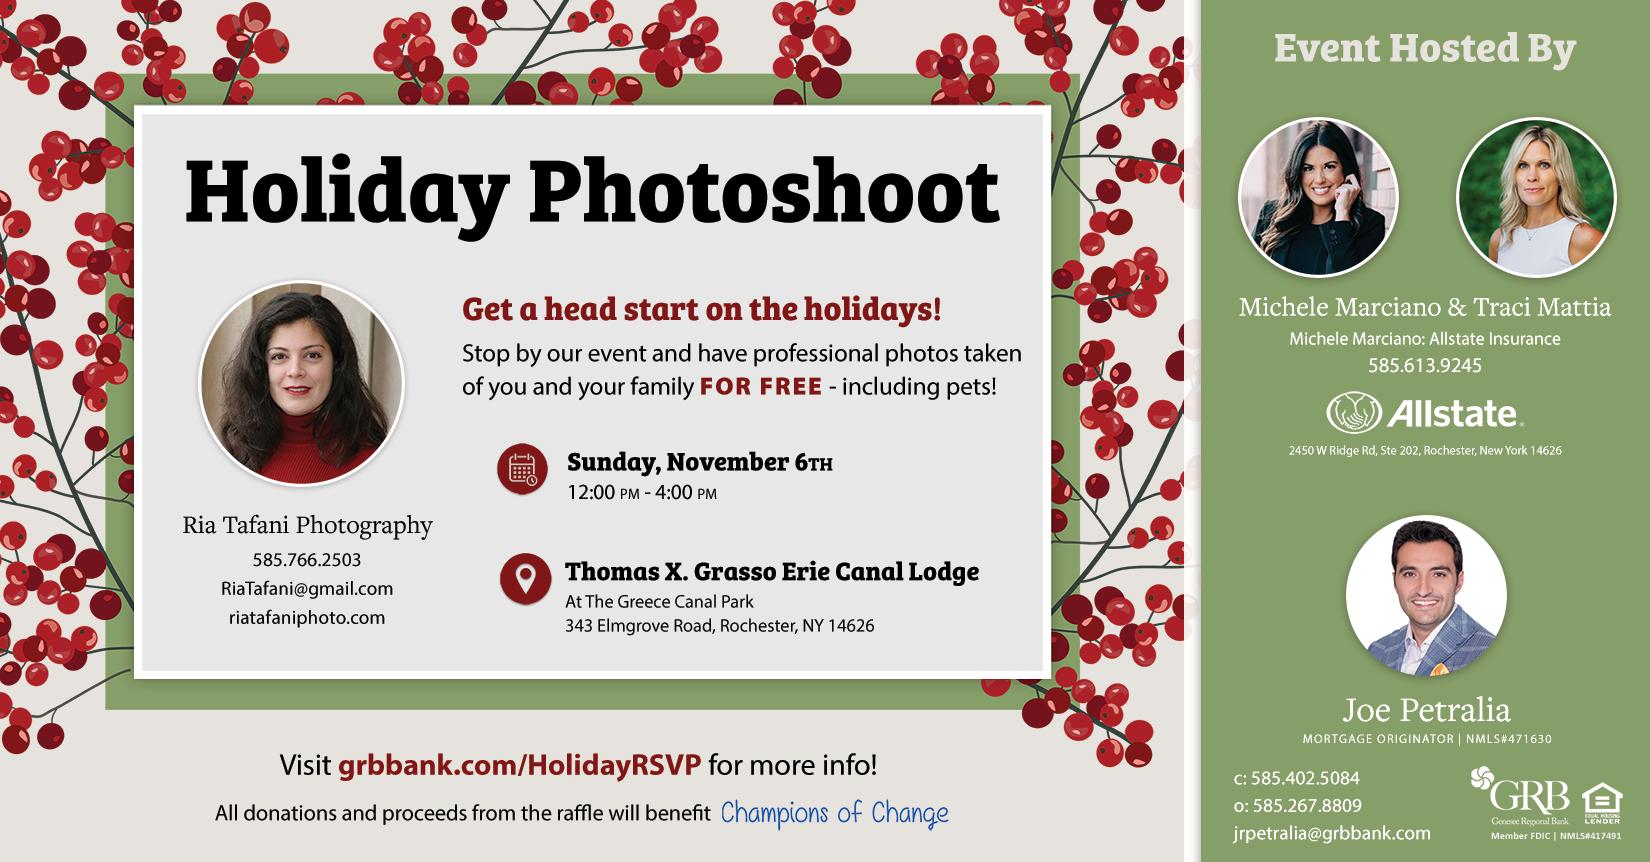 Invitation to attend Holiday Photoshoot